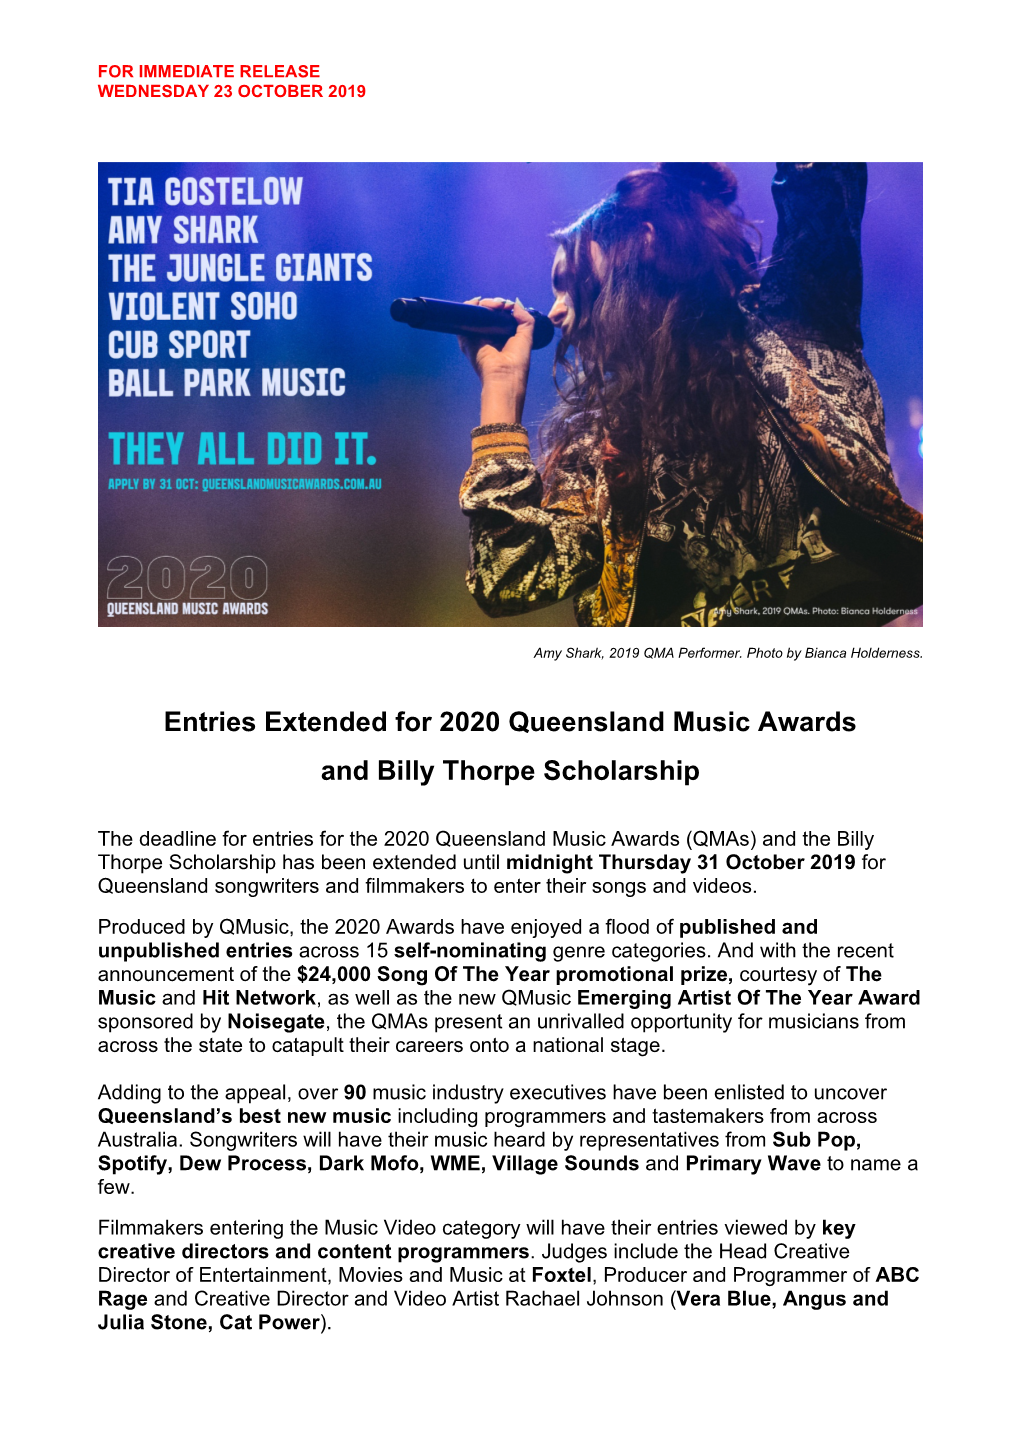 Entries Extended for 2020 Queensland Music Awards & Billy